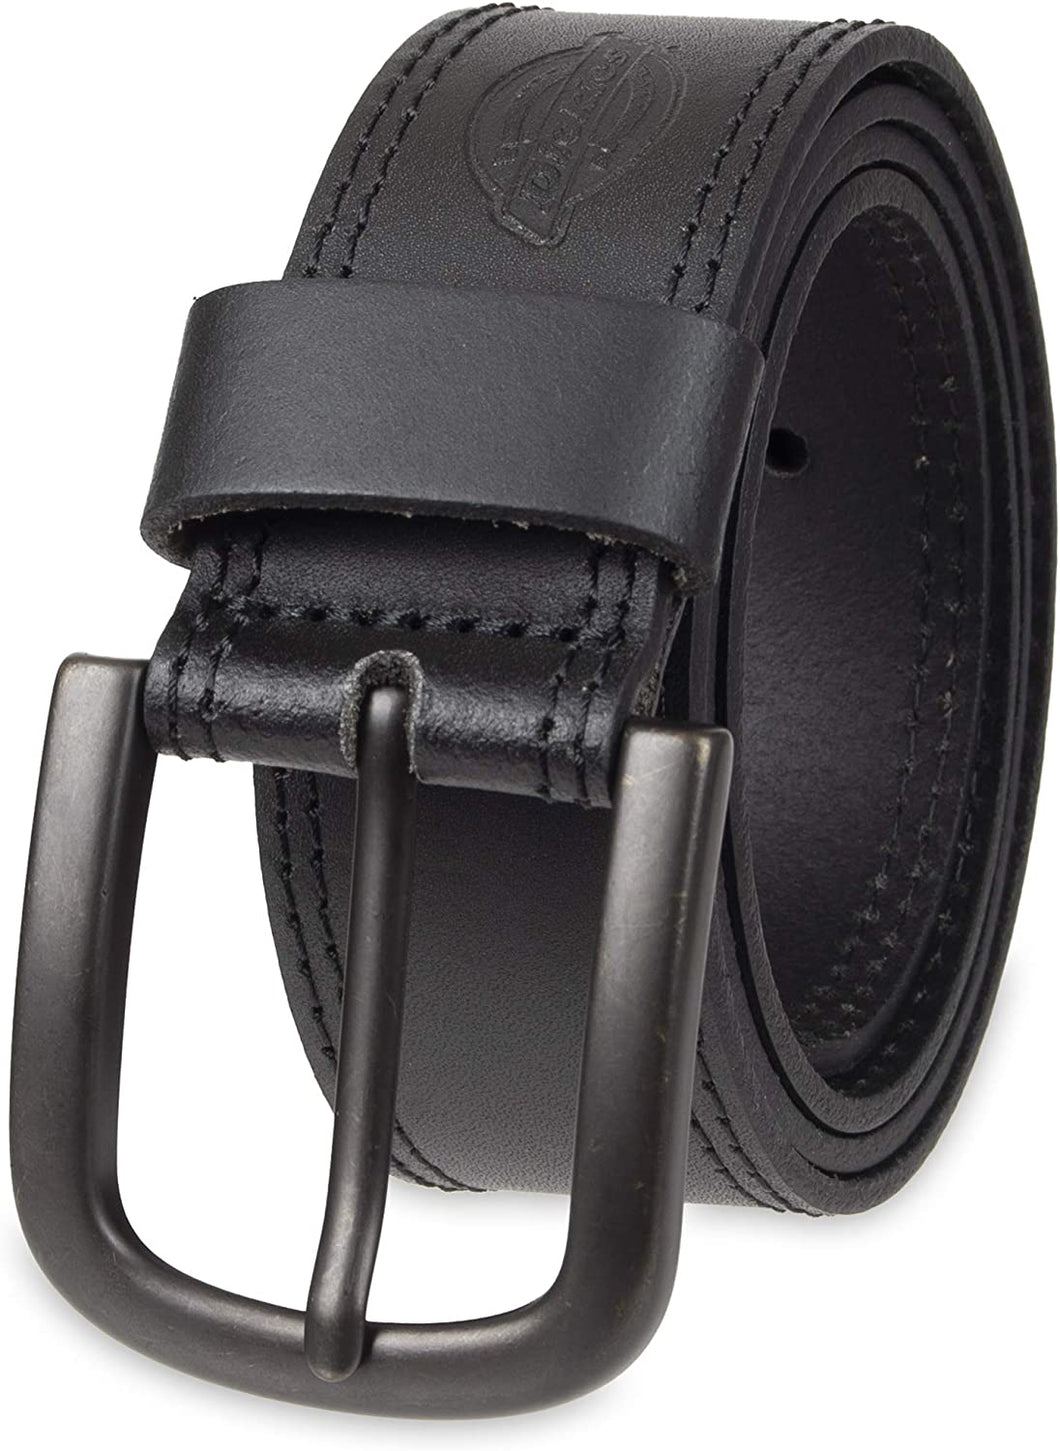 Mens 1 1/2 In. Leather Belt with Two Row Stitch